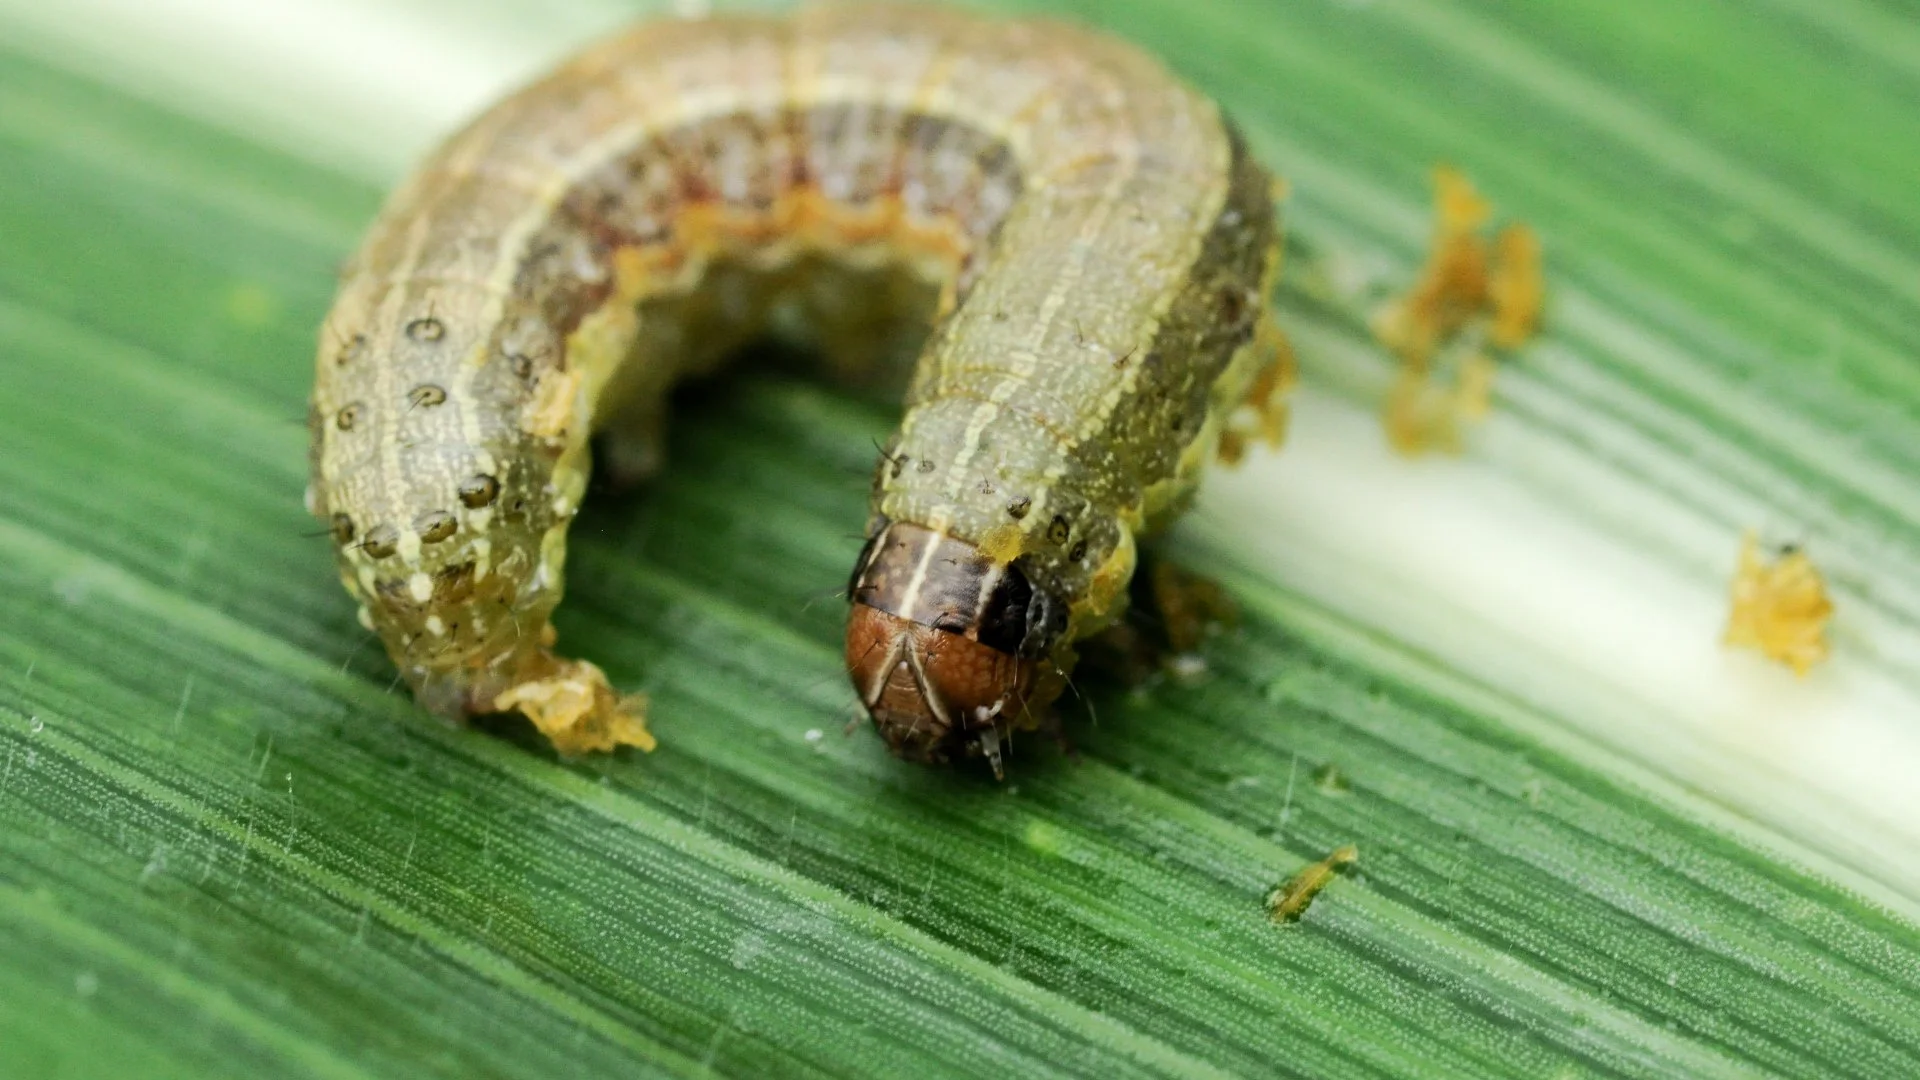 Armyworms 101: Everything You Should Know About These Destructive Lawn Pests